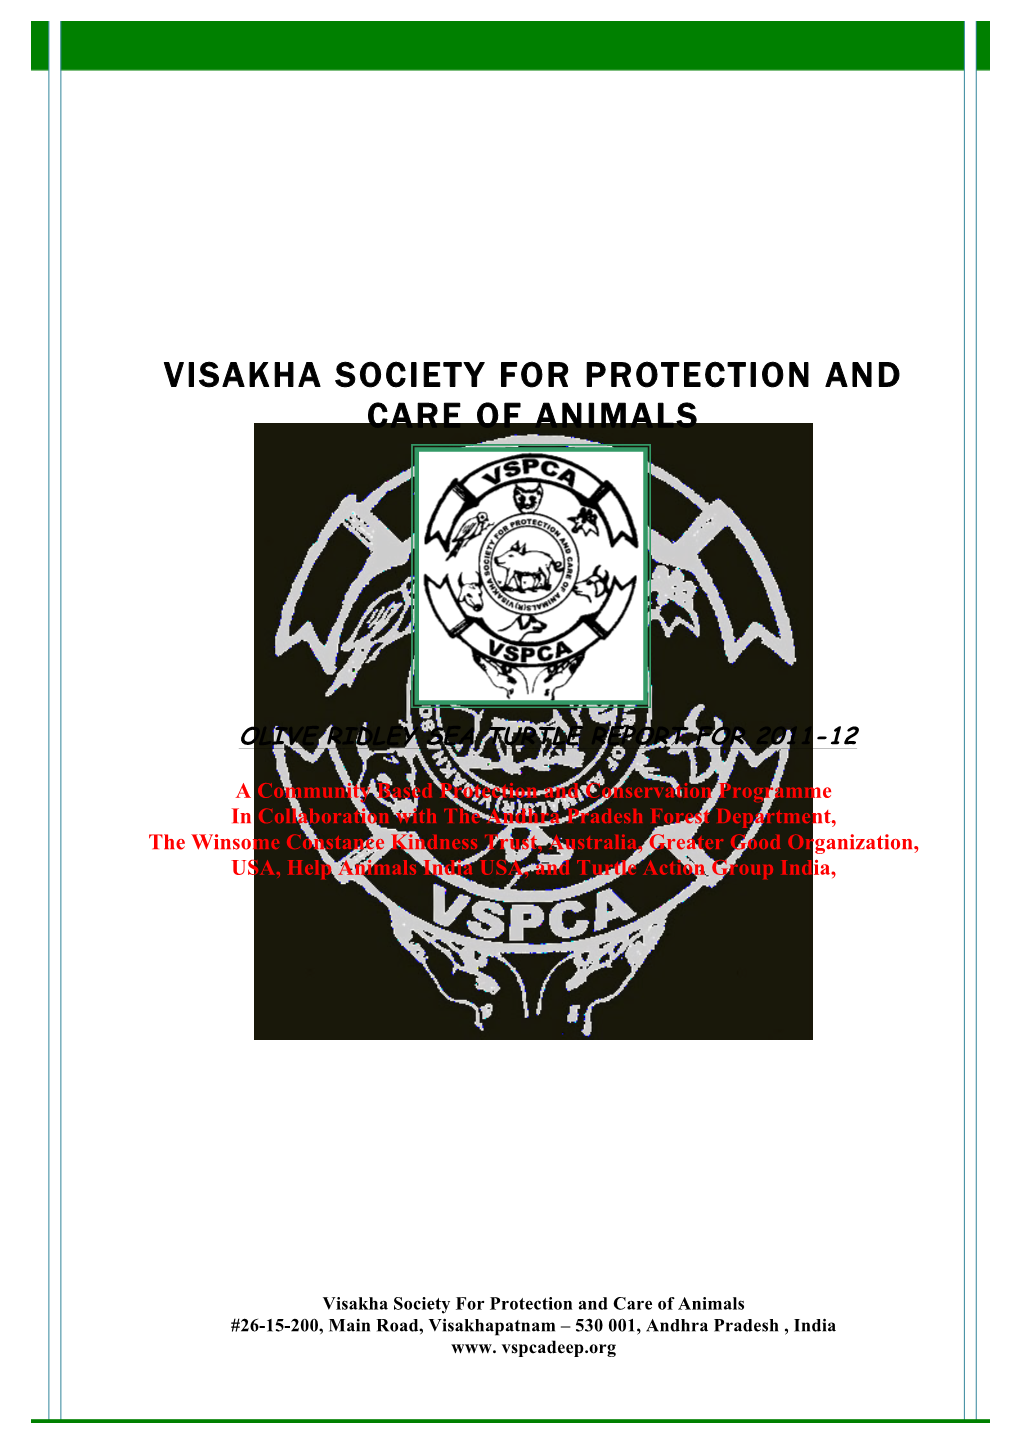 Visakha Society for Protection and Care of Animals